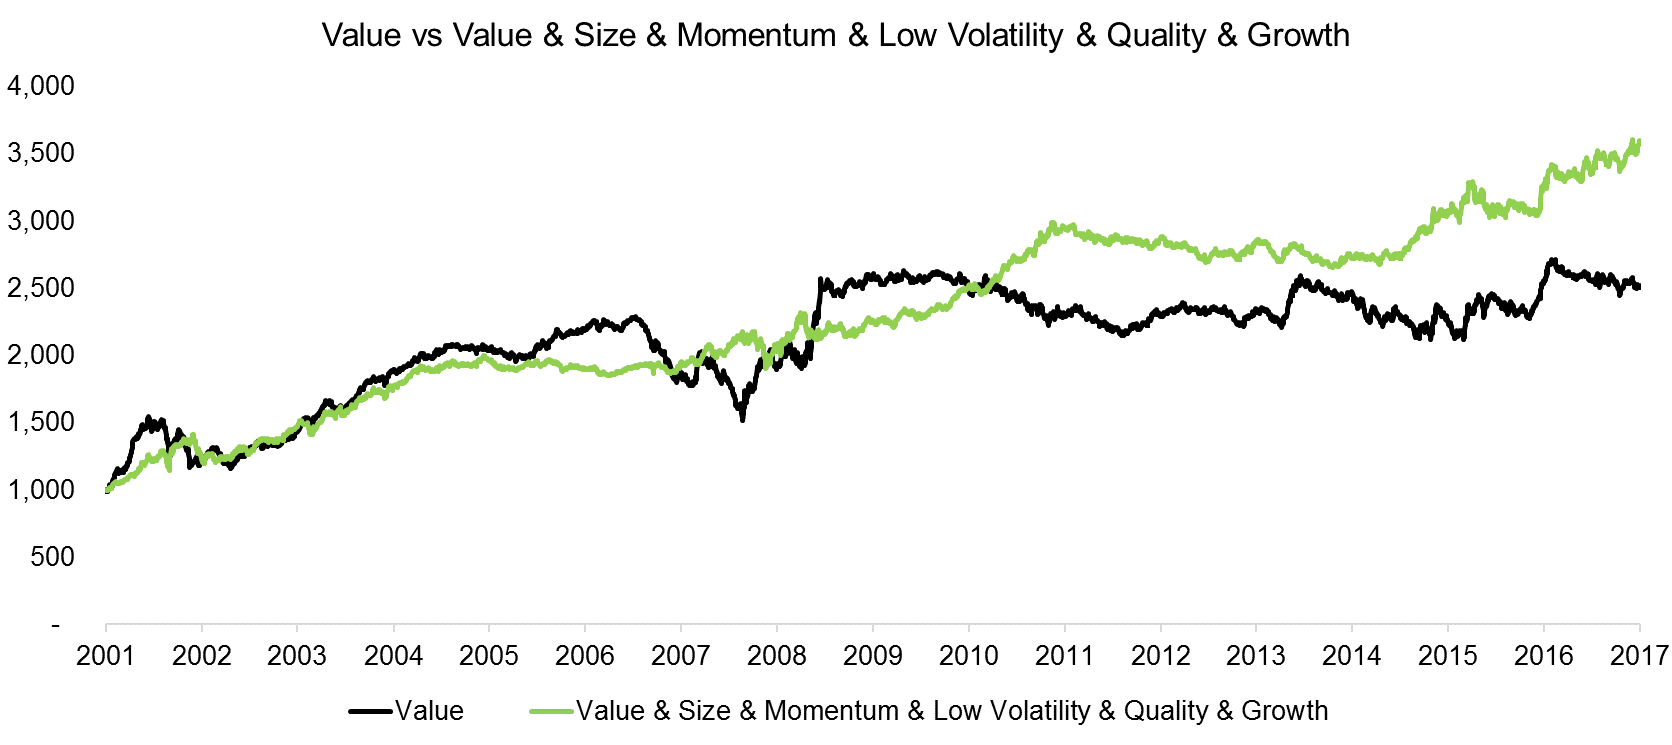 Value vs Value & Size & Momentum & Low Volatility & Quality & Growth